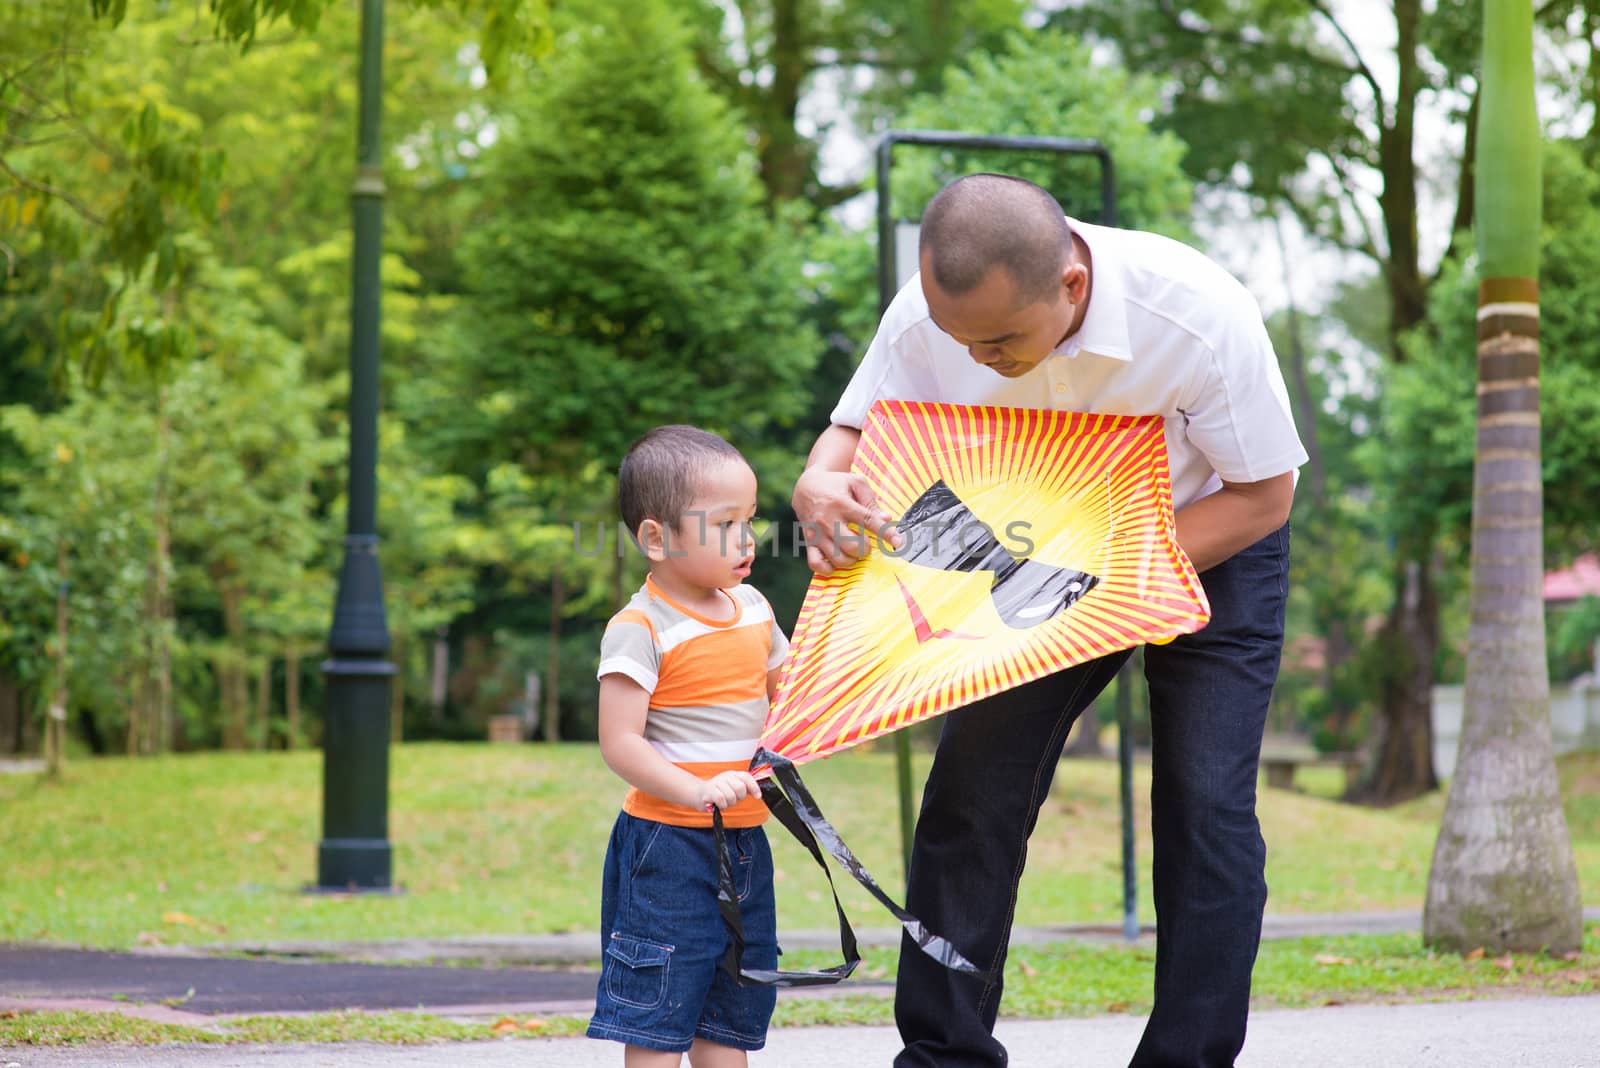 Father teaching son to fly a kite at outdoor garden park. Happy Southeast Asian family living lifestyle.